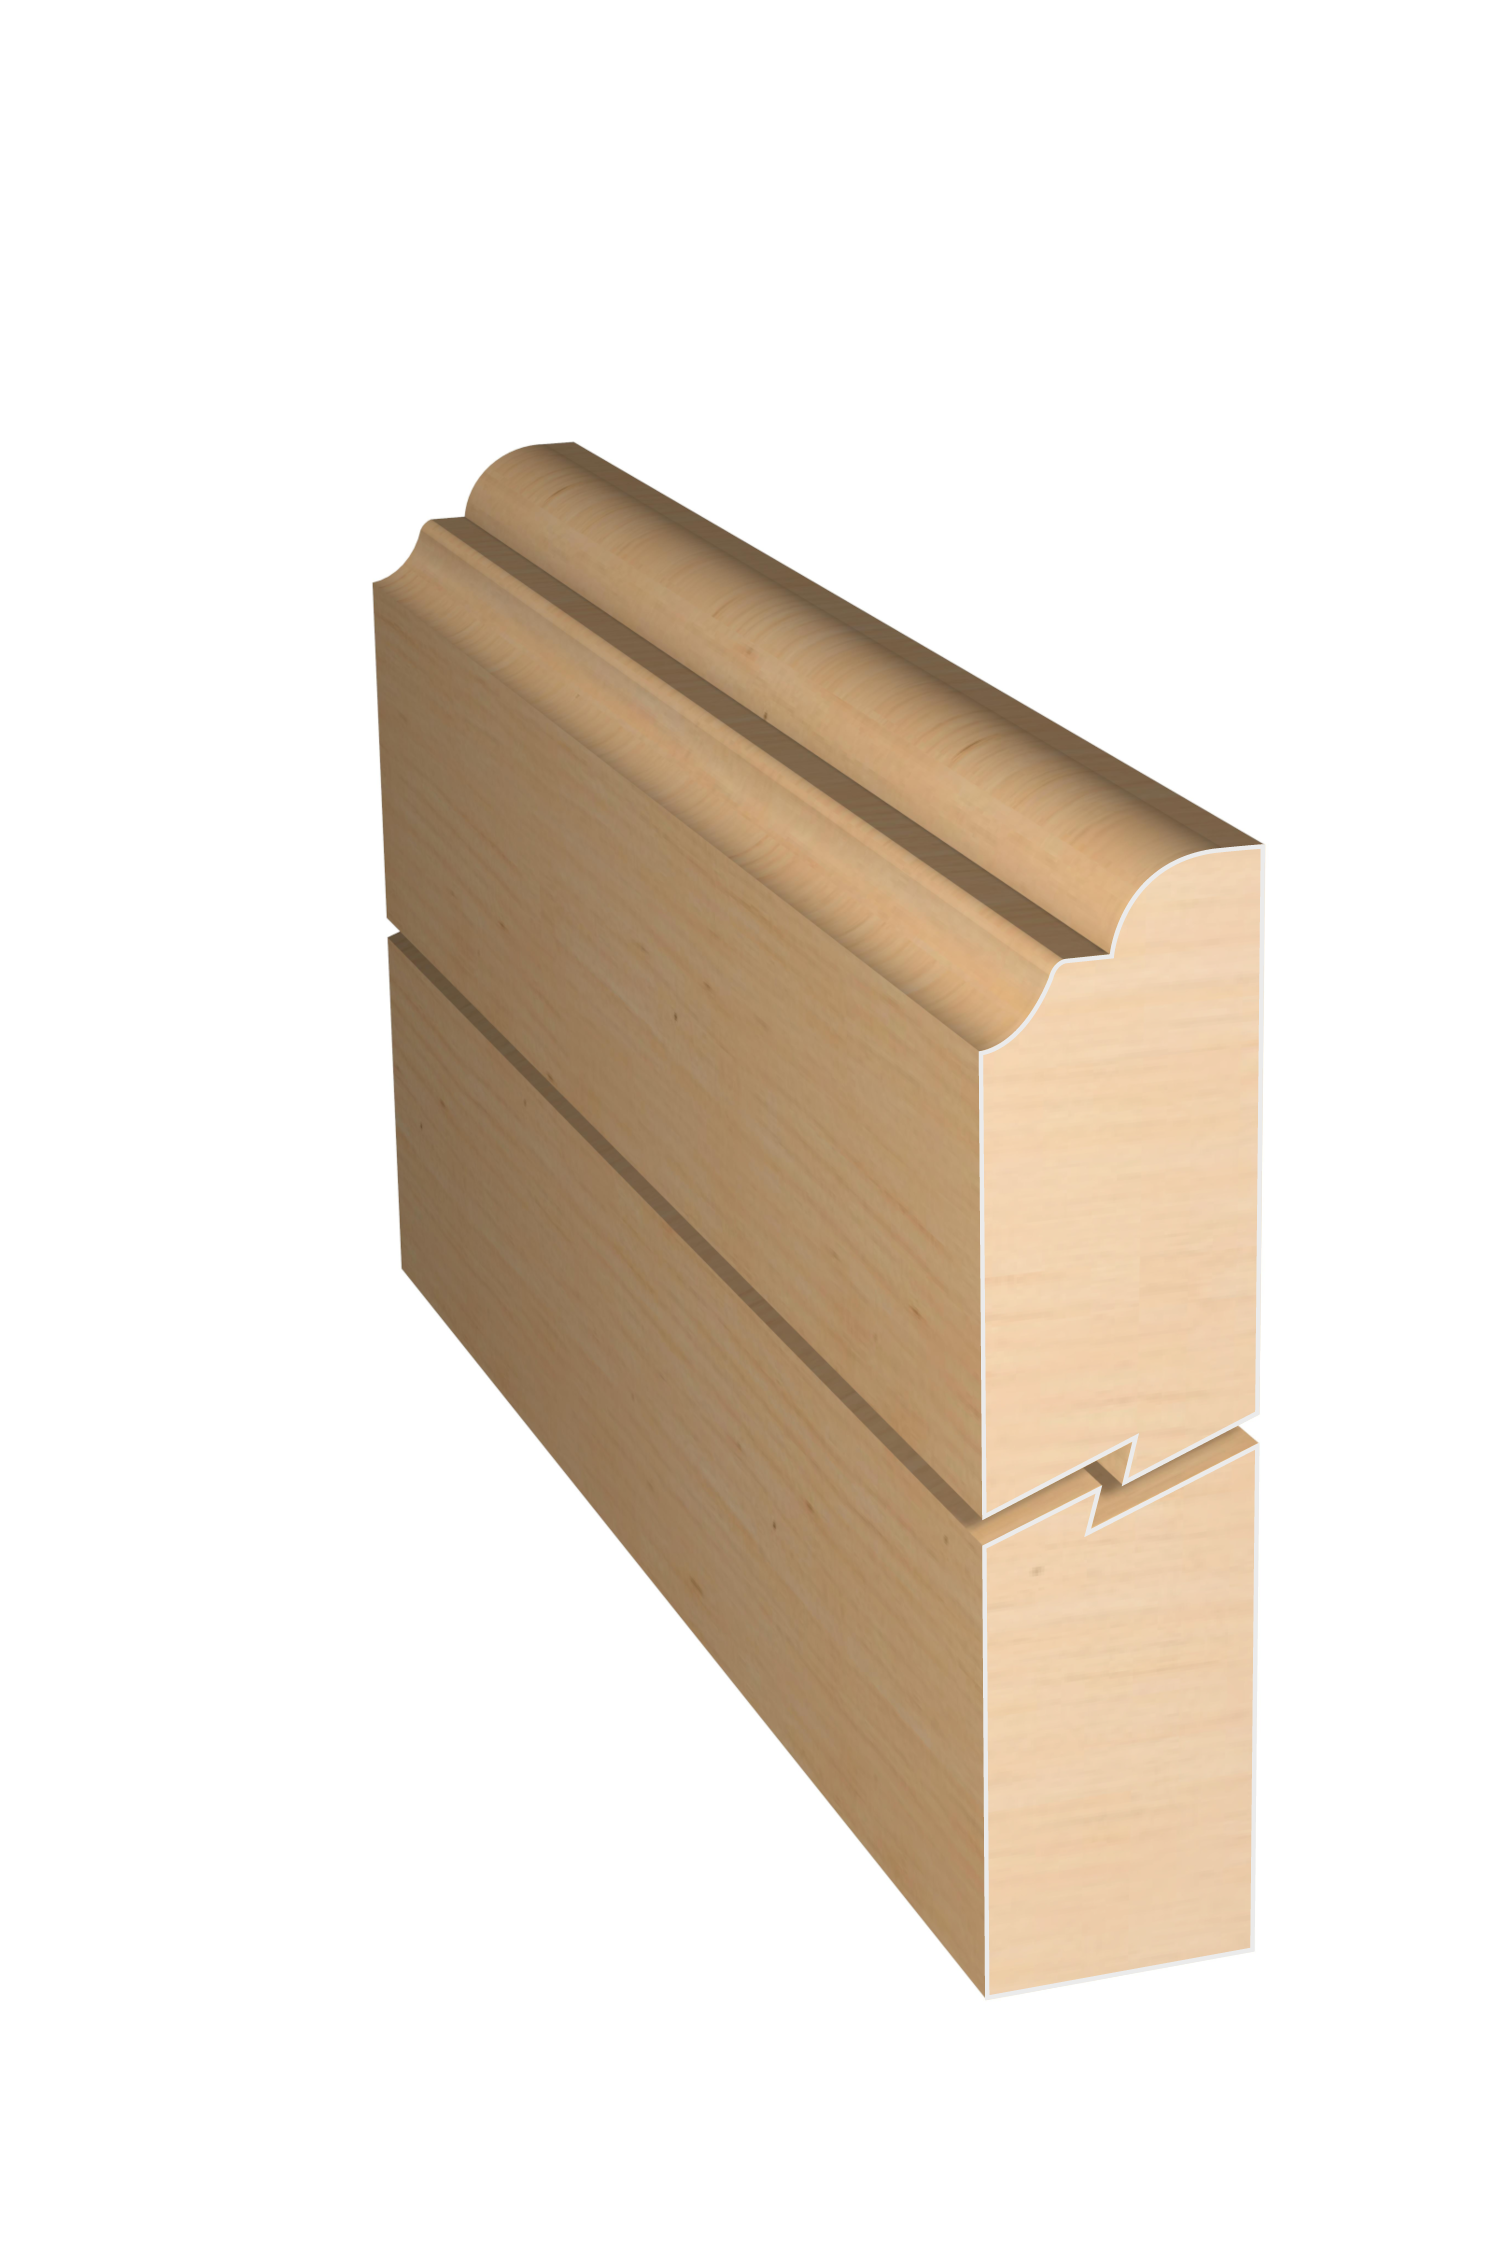 Three dimensional rendering of custom edge profile wood molding SKPL64 made by Public Lumber Company in Detroit.